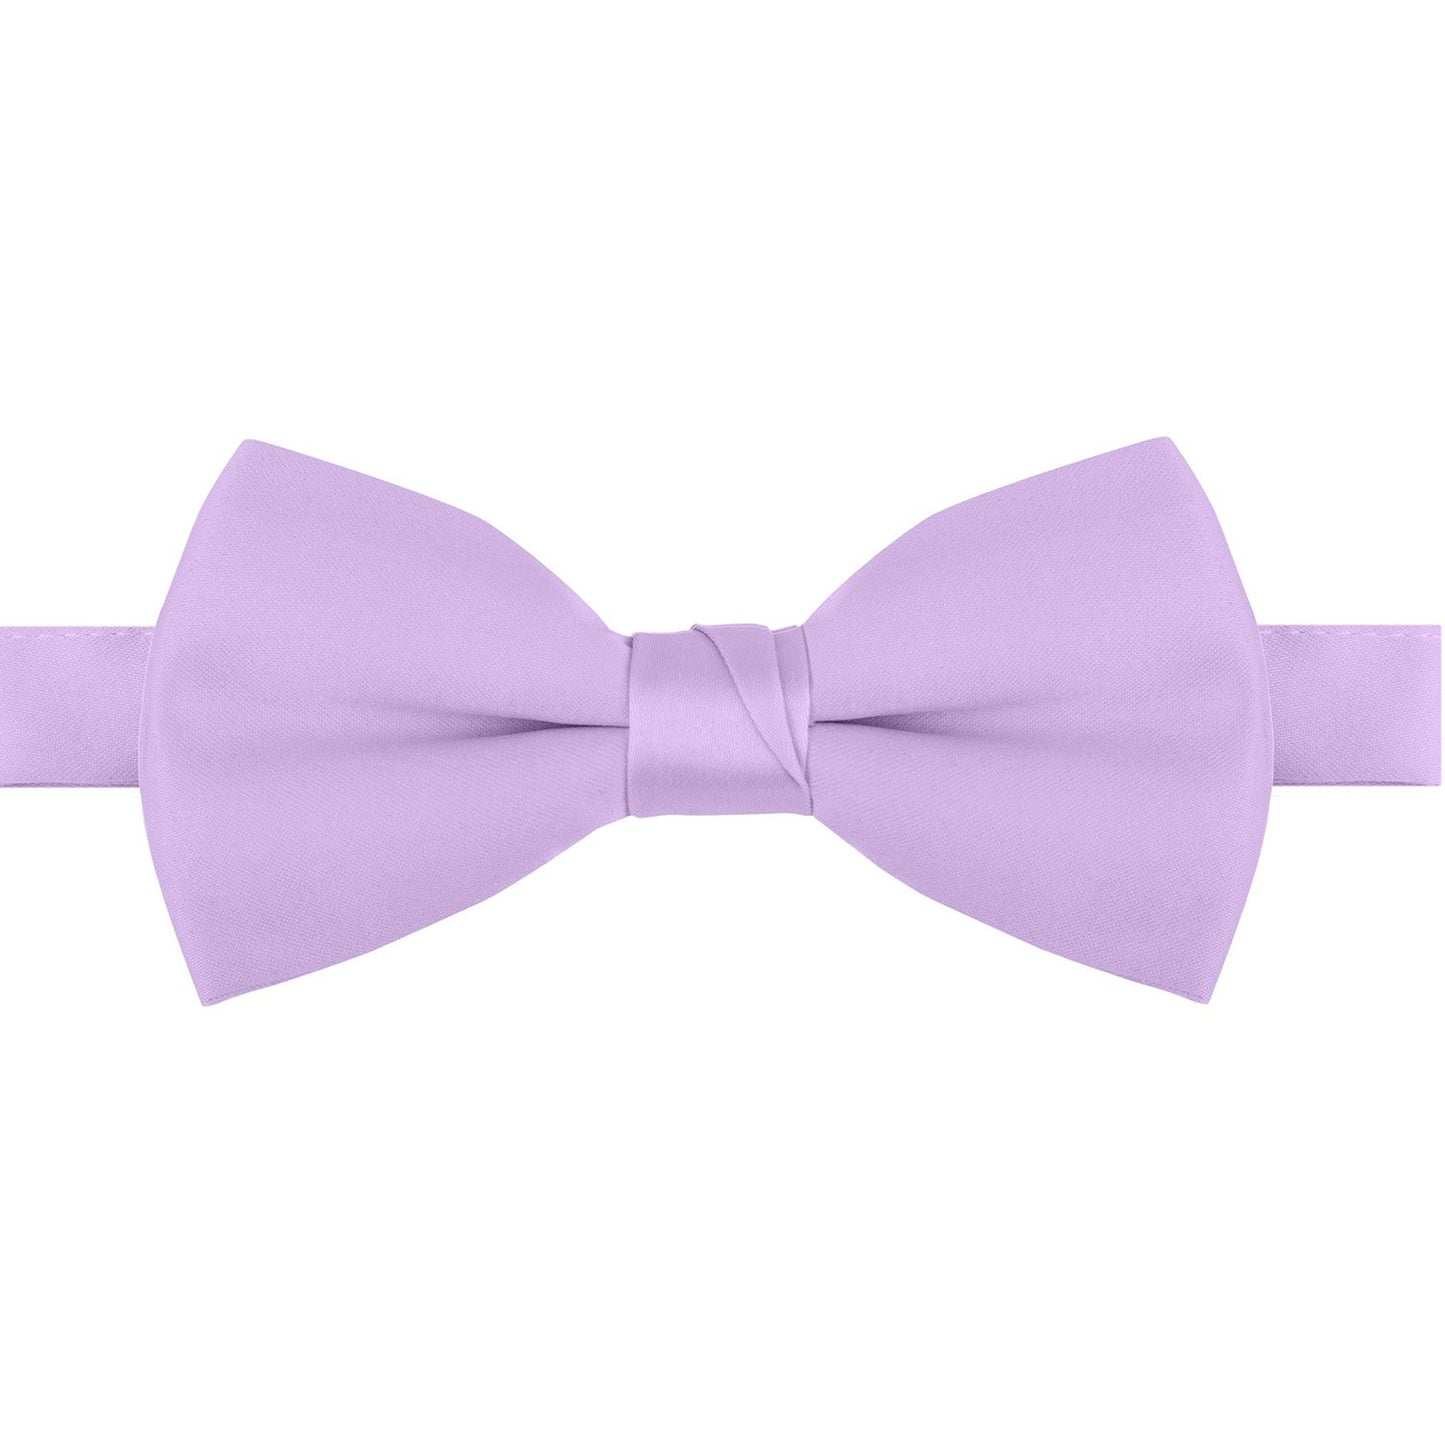 Polyester Satin Bow Tie - Banded or Clip-On - 26 Colors